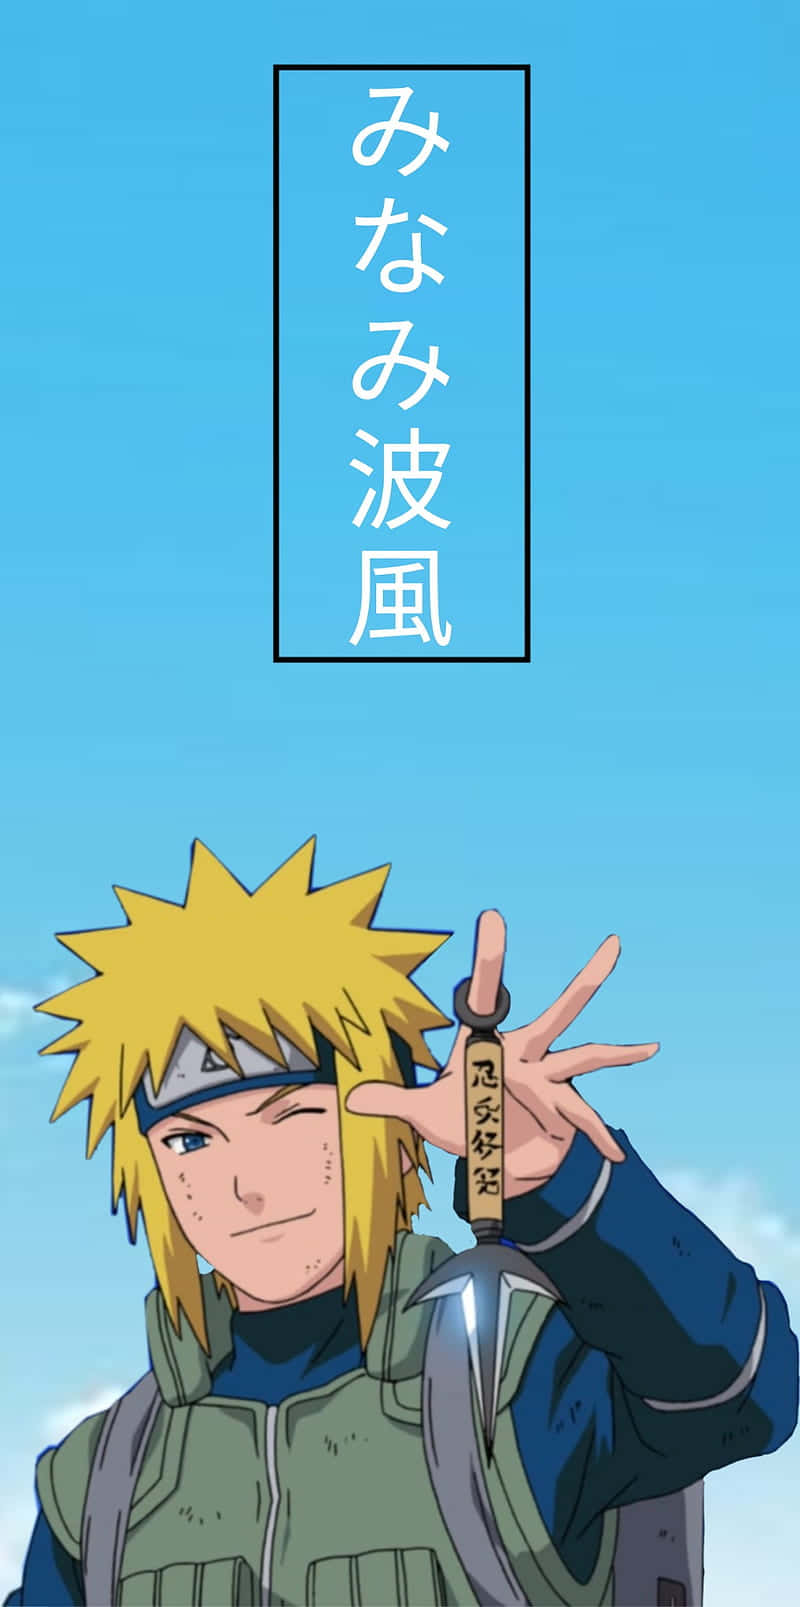 Improve Your Productivity With the Latest Minato iPhone Wallpaper